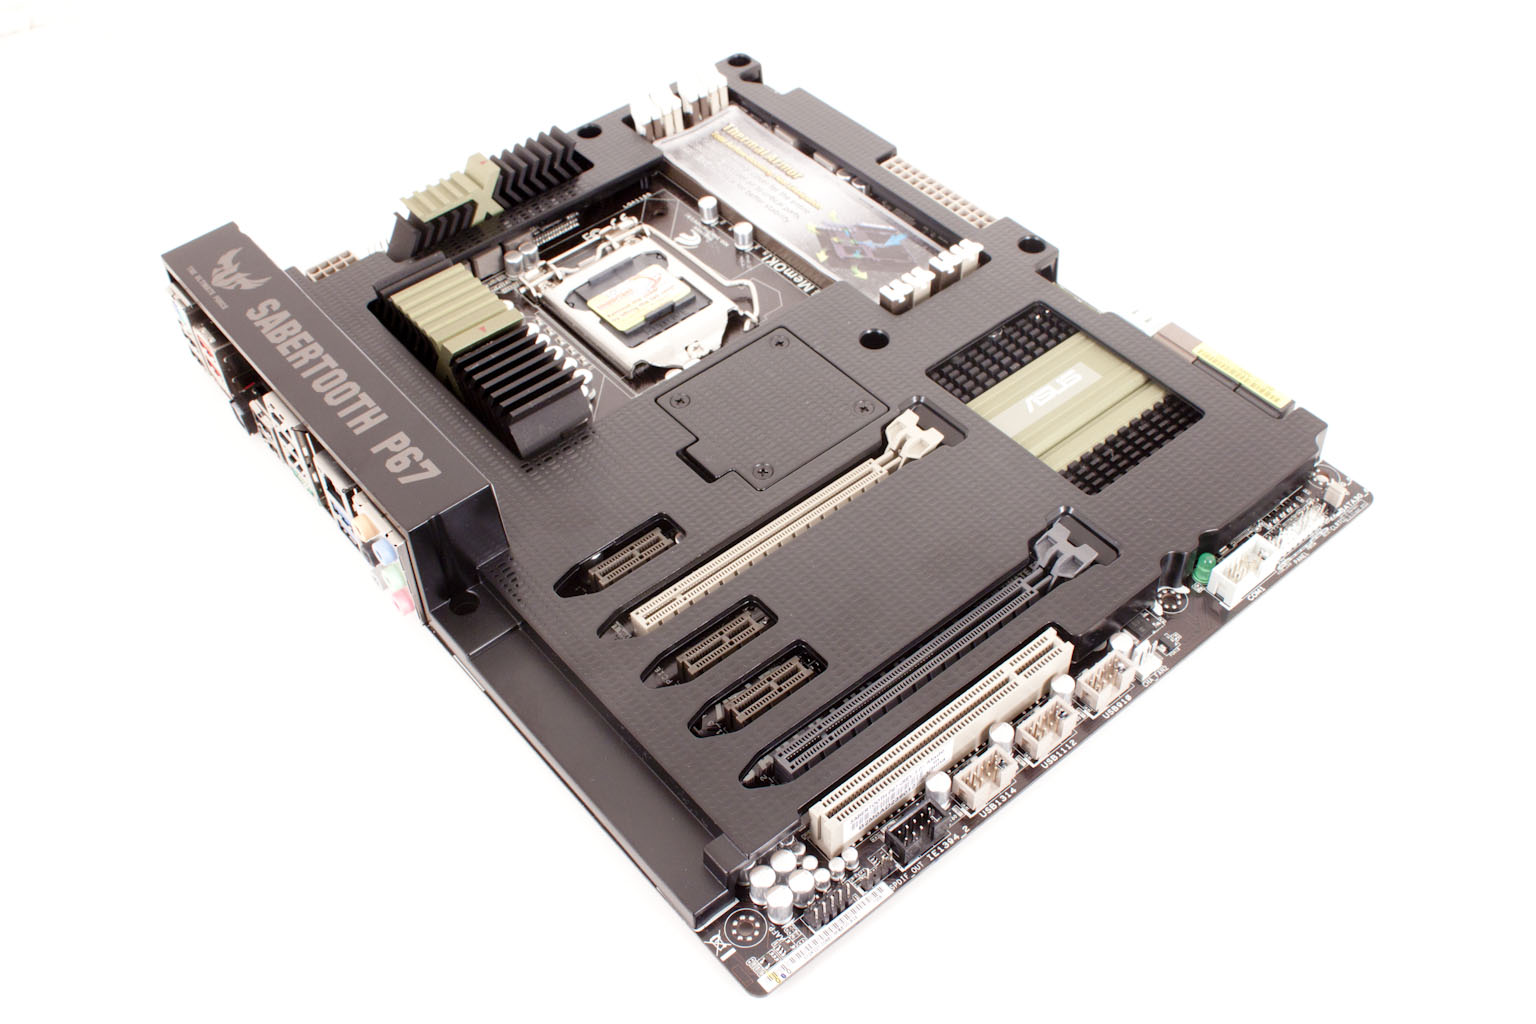 The Asus Sabertooth P67 Part I - Design and Features